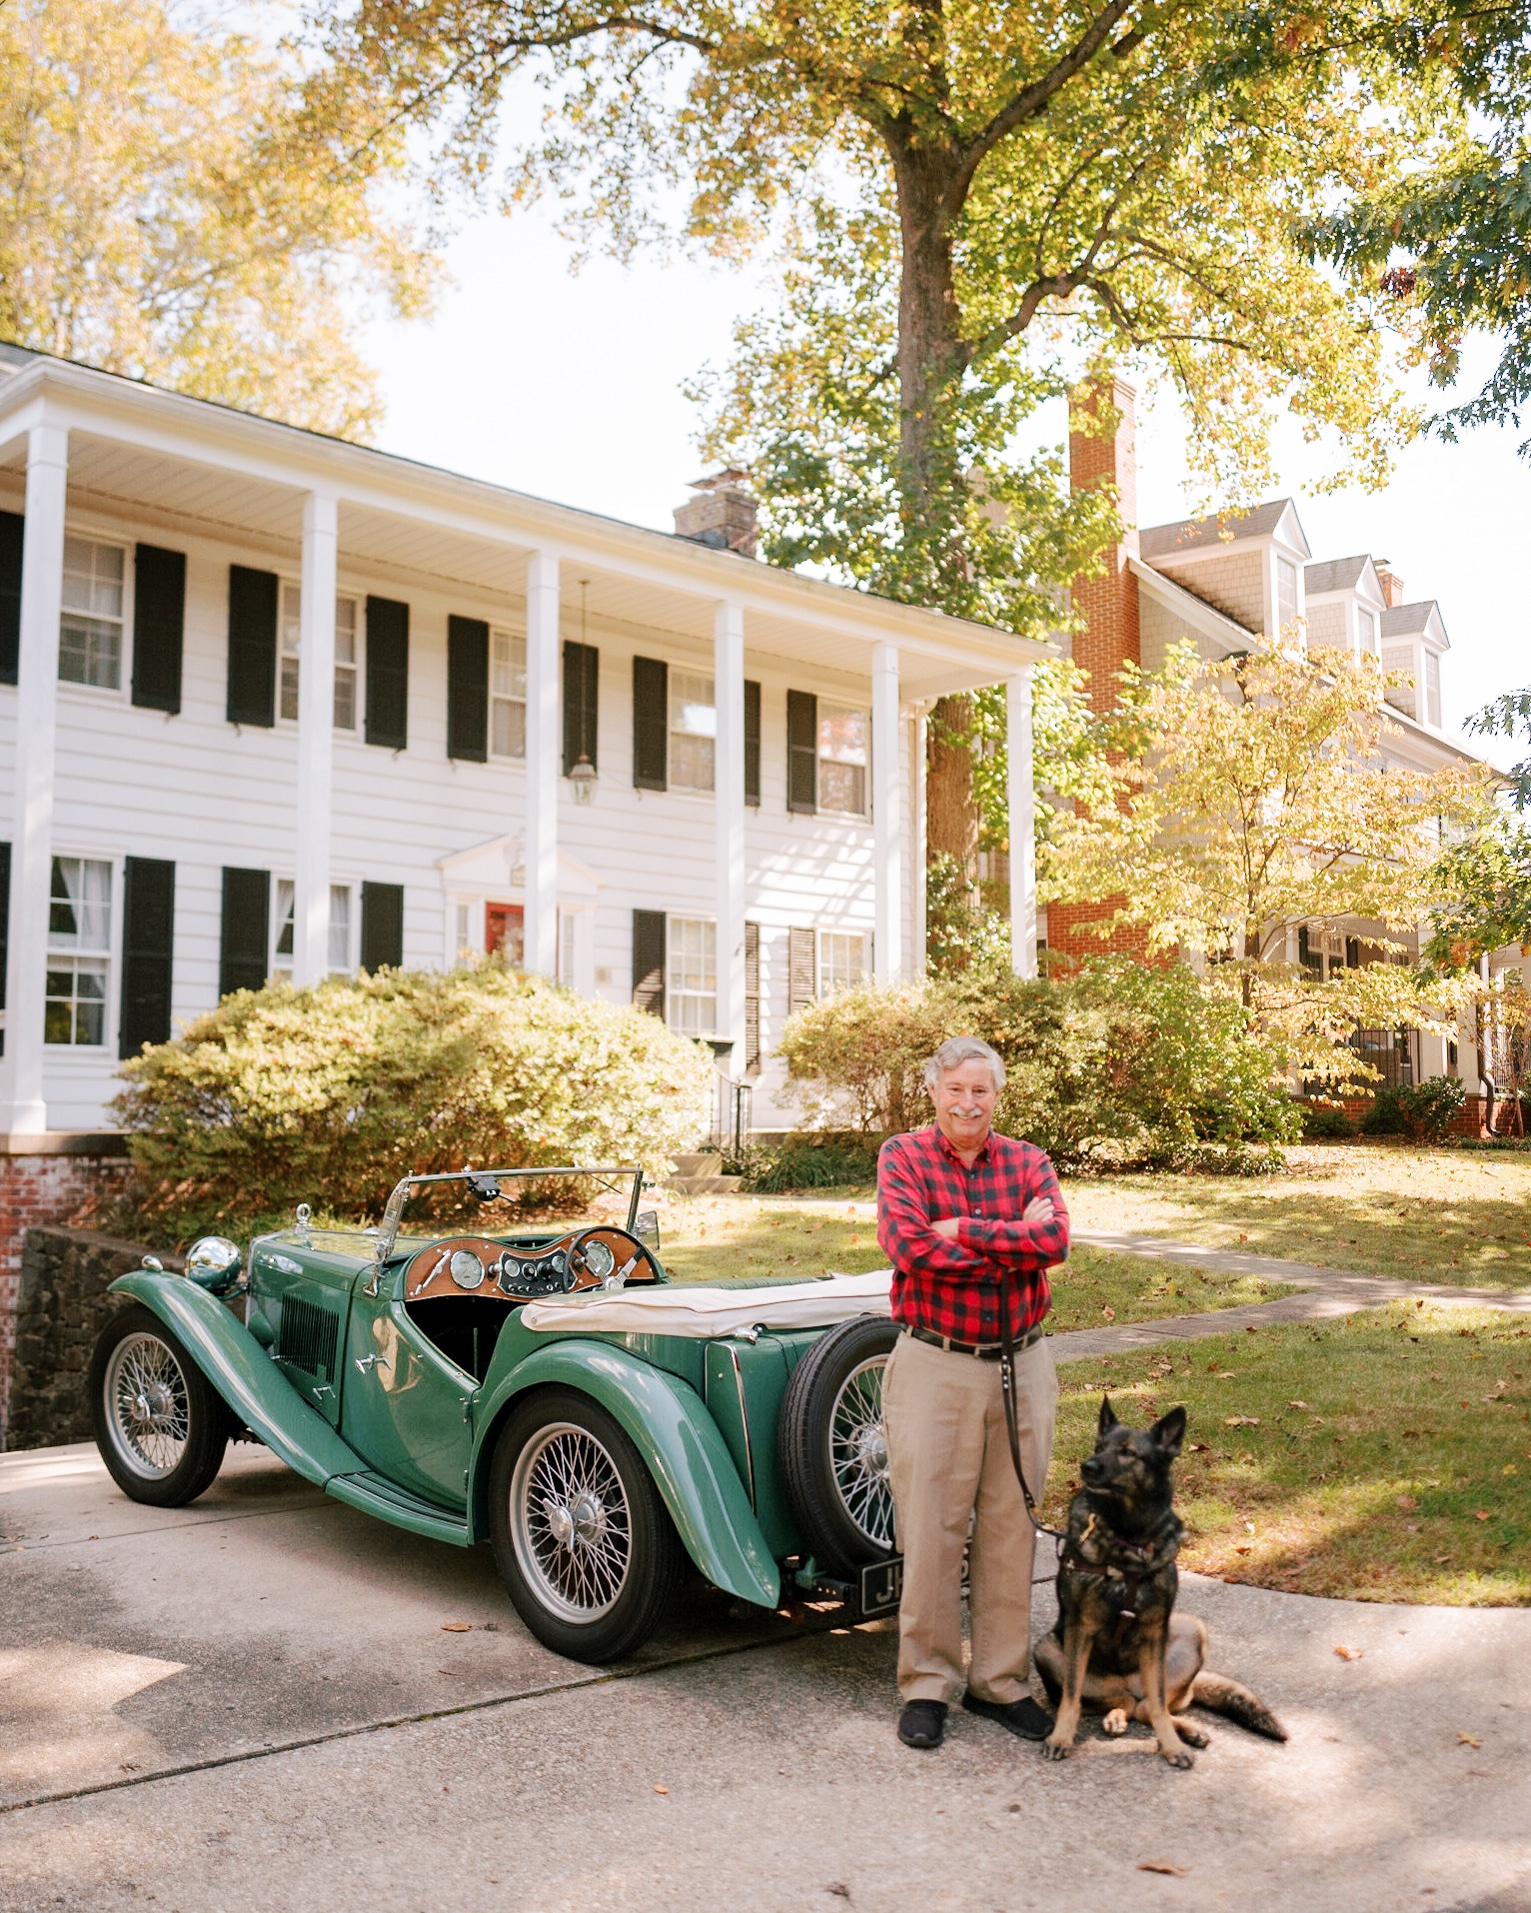 fidelco client steve smiling with his guide dog cricket sitting by his feet in front of his vintage car